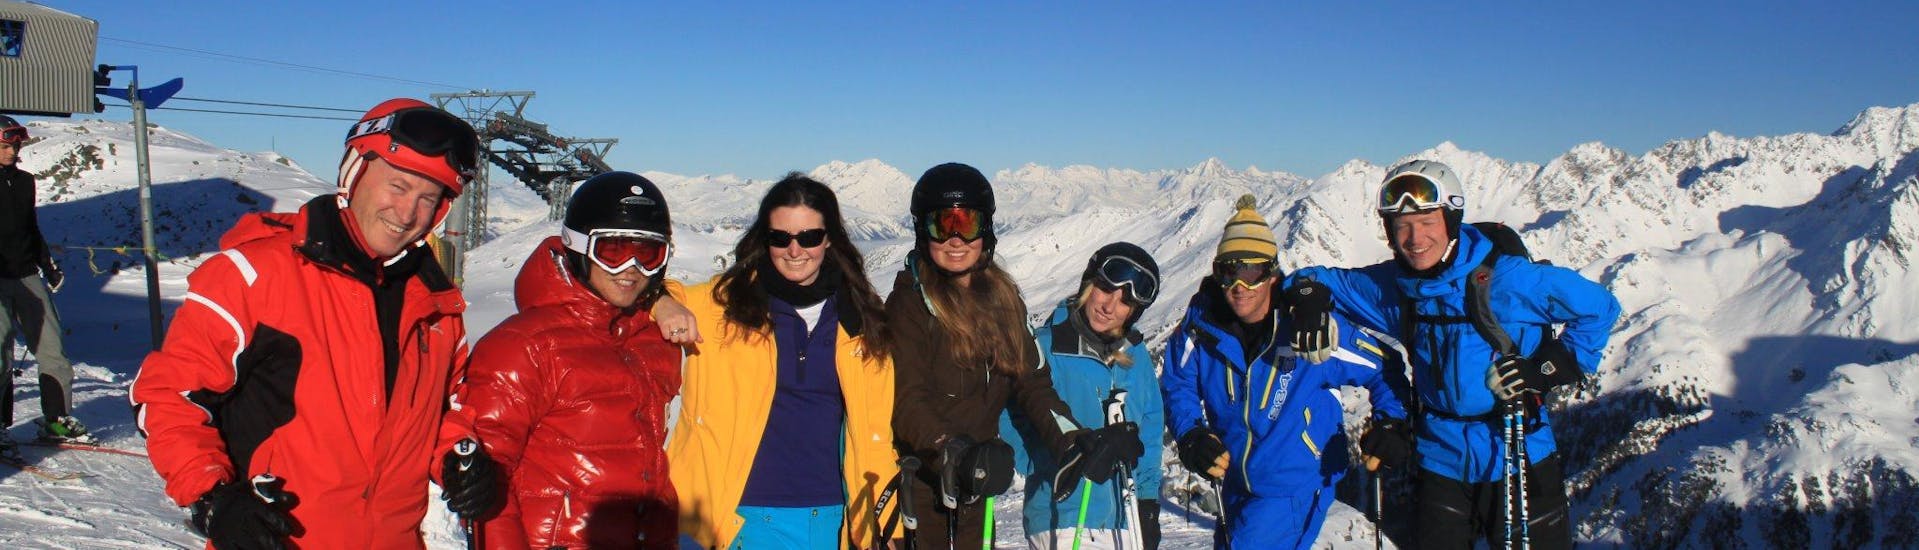 A group at the adult ski lessons for all levels with Altitude Ski School Zermatt take a photo on a sunny day in Zermatt.